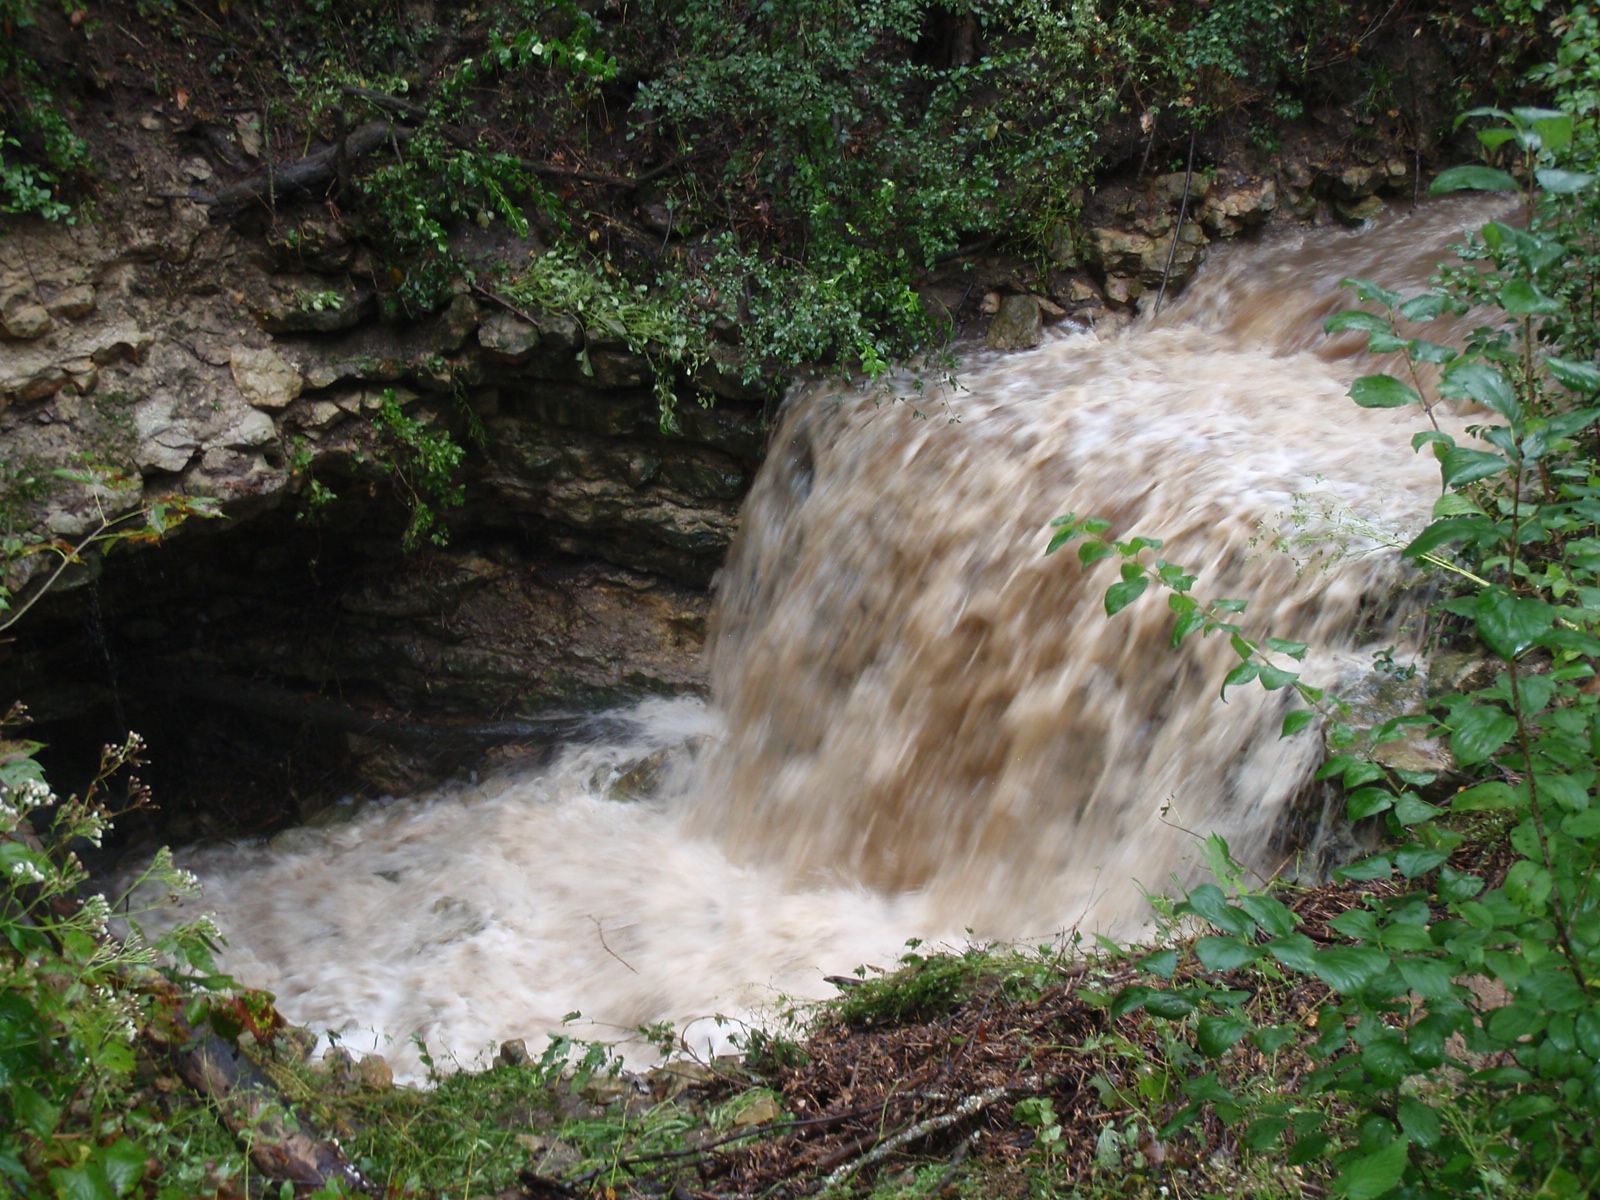 Goliath's Cave near Cherry Grove, Minn., floods in wet weather.></strib><h3><strong>Goliath's Cave</strong></h3><p id=